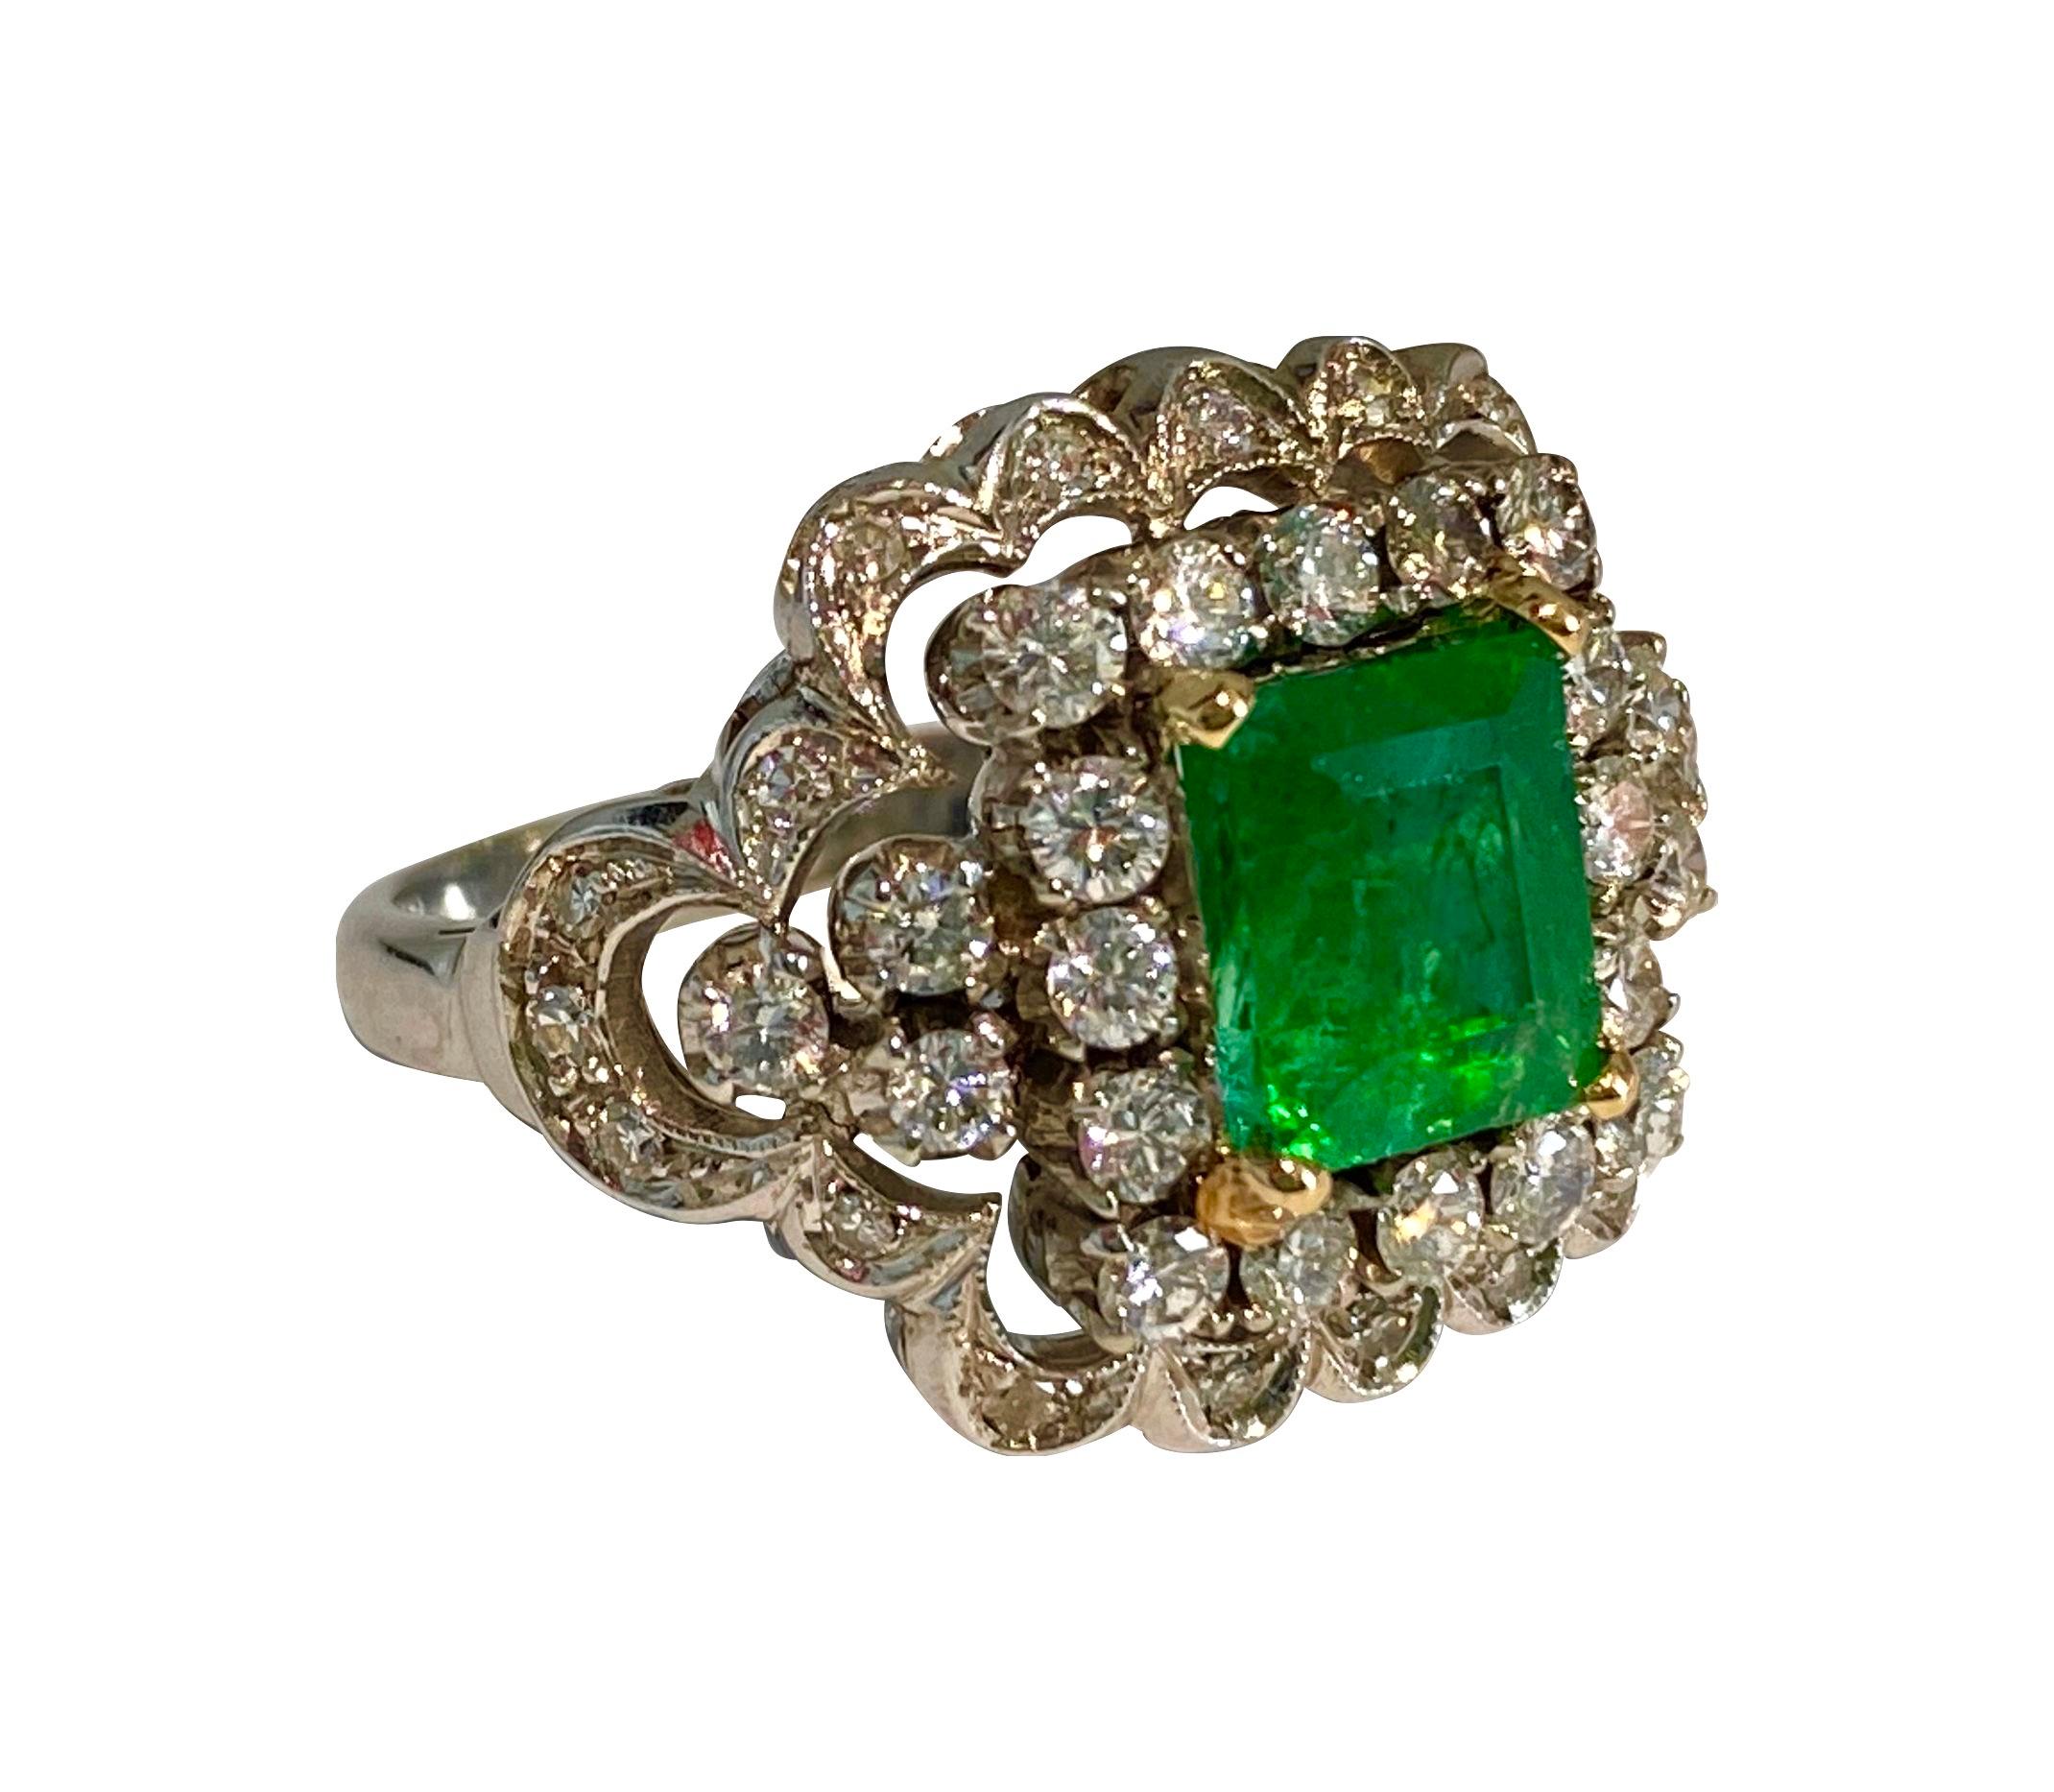 Metal: 18k white gold. Diamonds: 2.05 carat weight total, VS clarity and F color, round brilliant cut set in prongs. 
Emerald: 3.00 carats, deep saturation and color. 
Total carat weight of all precious gemstones: 5.05 carats. 
All precious stones